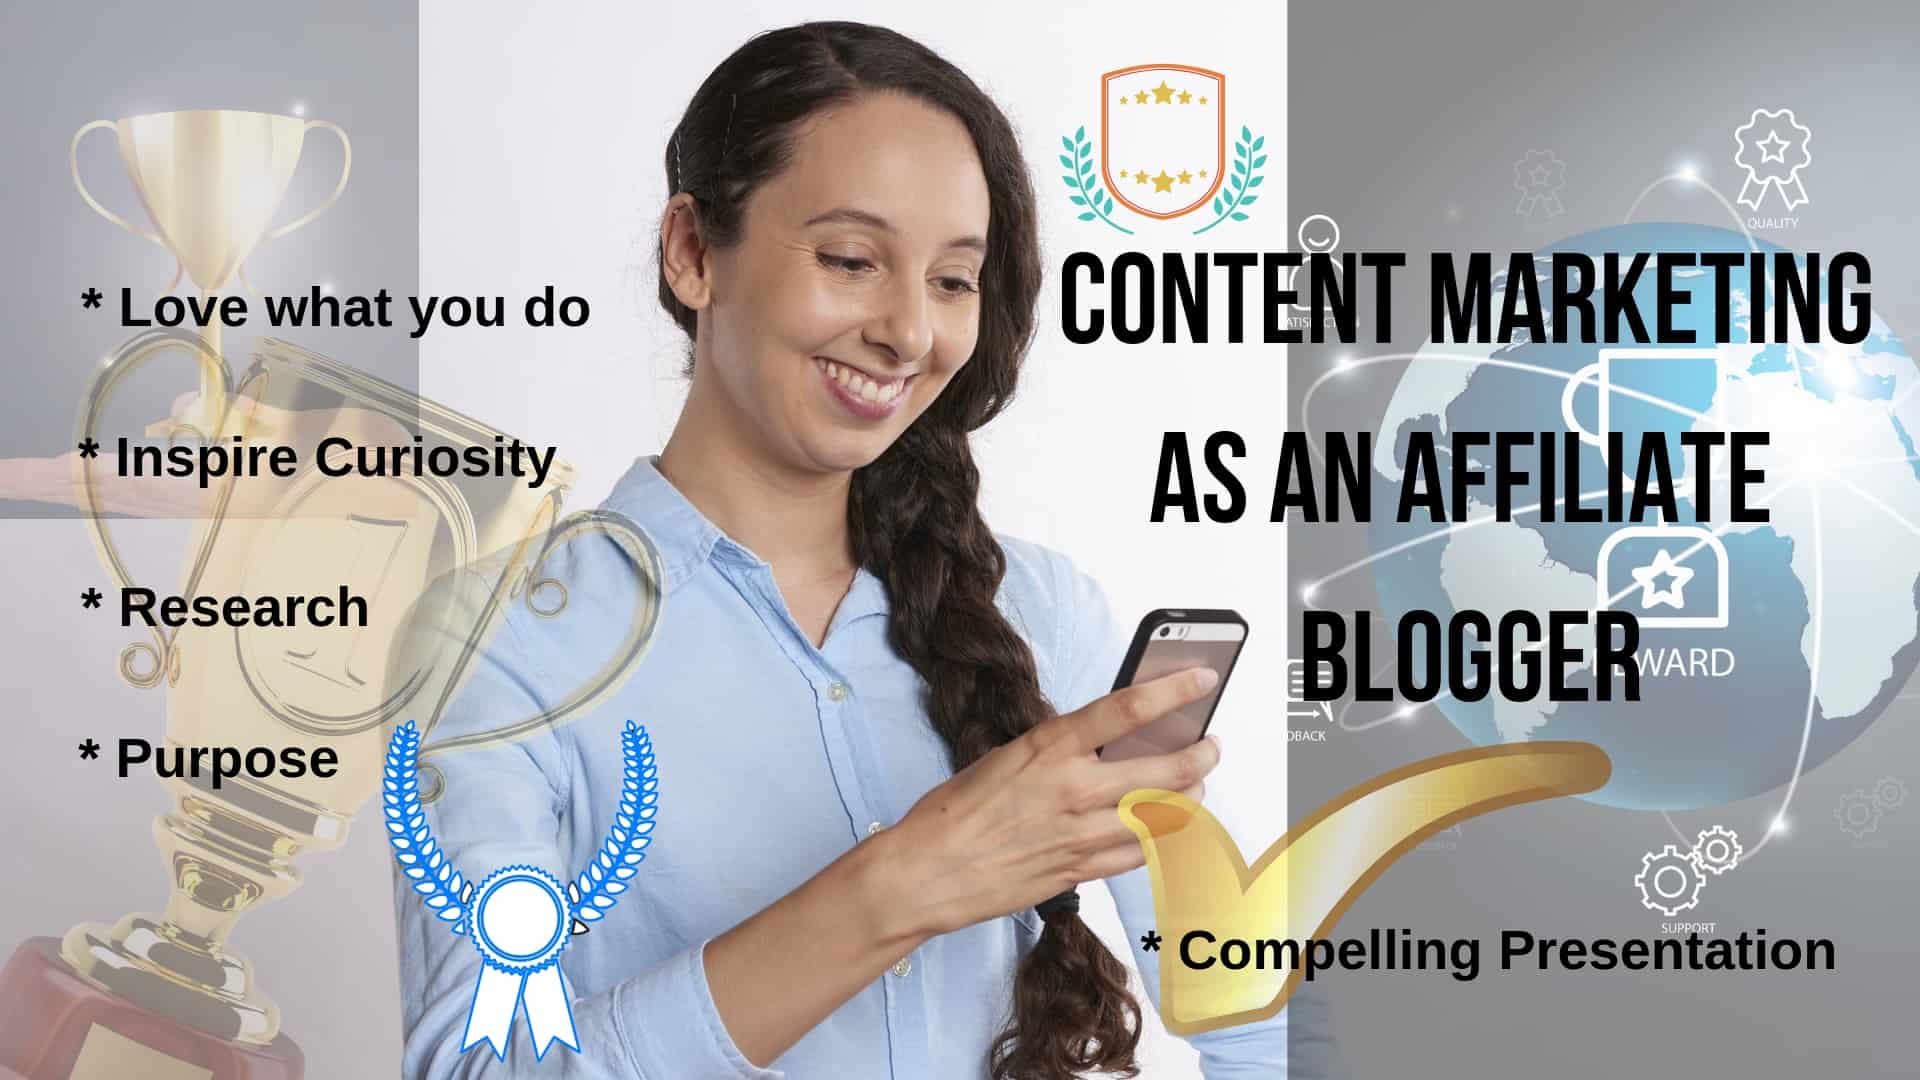 Content marketing as an affiliate blogger